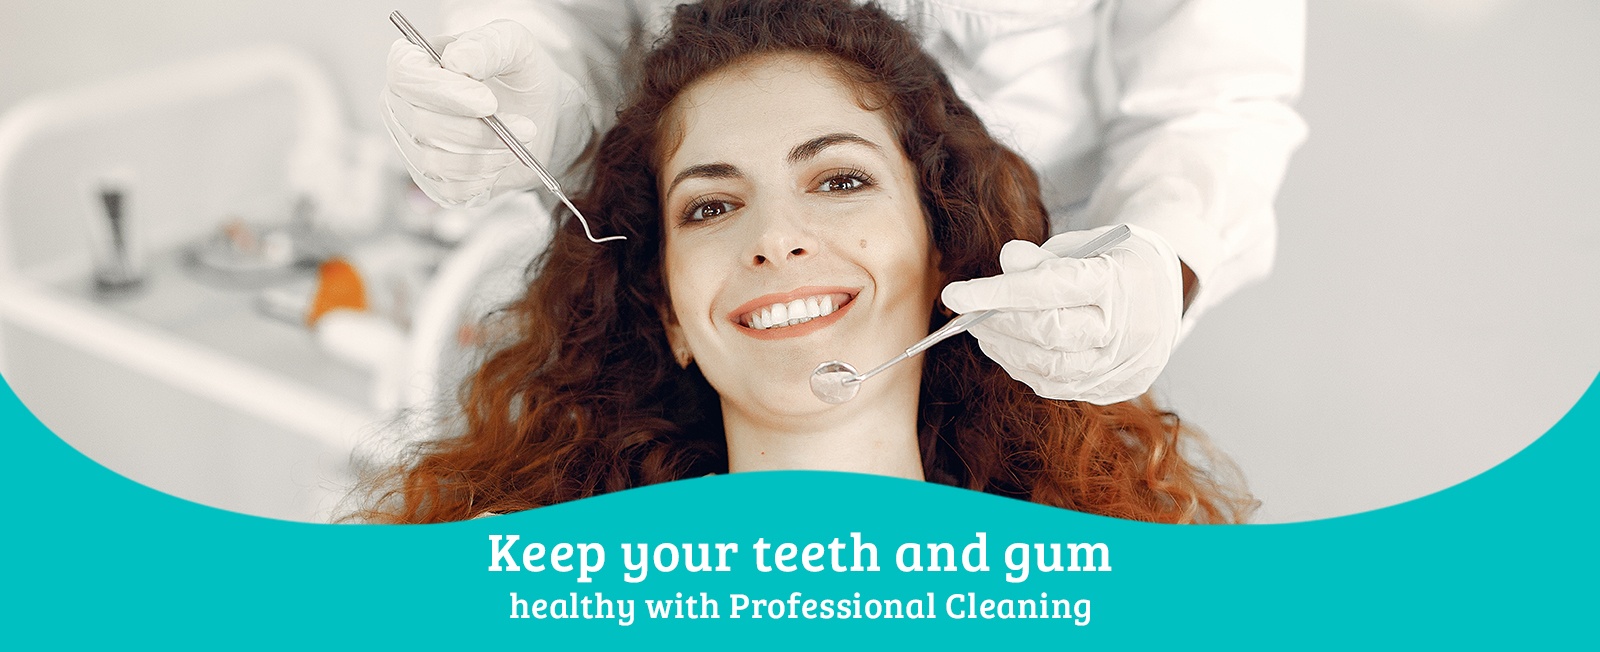 Professional Teeth Cleaning Toronto by Dentists on Bloor